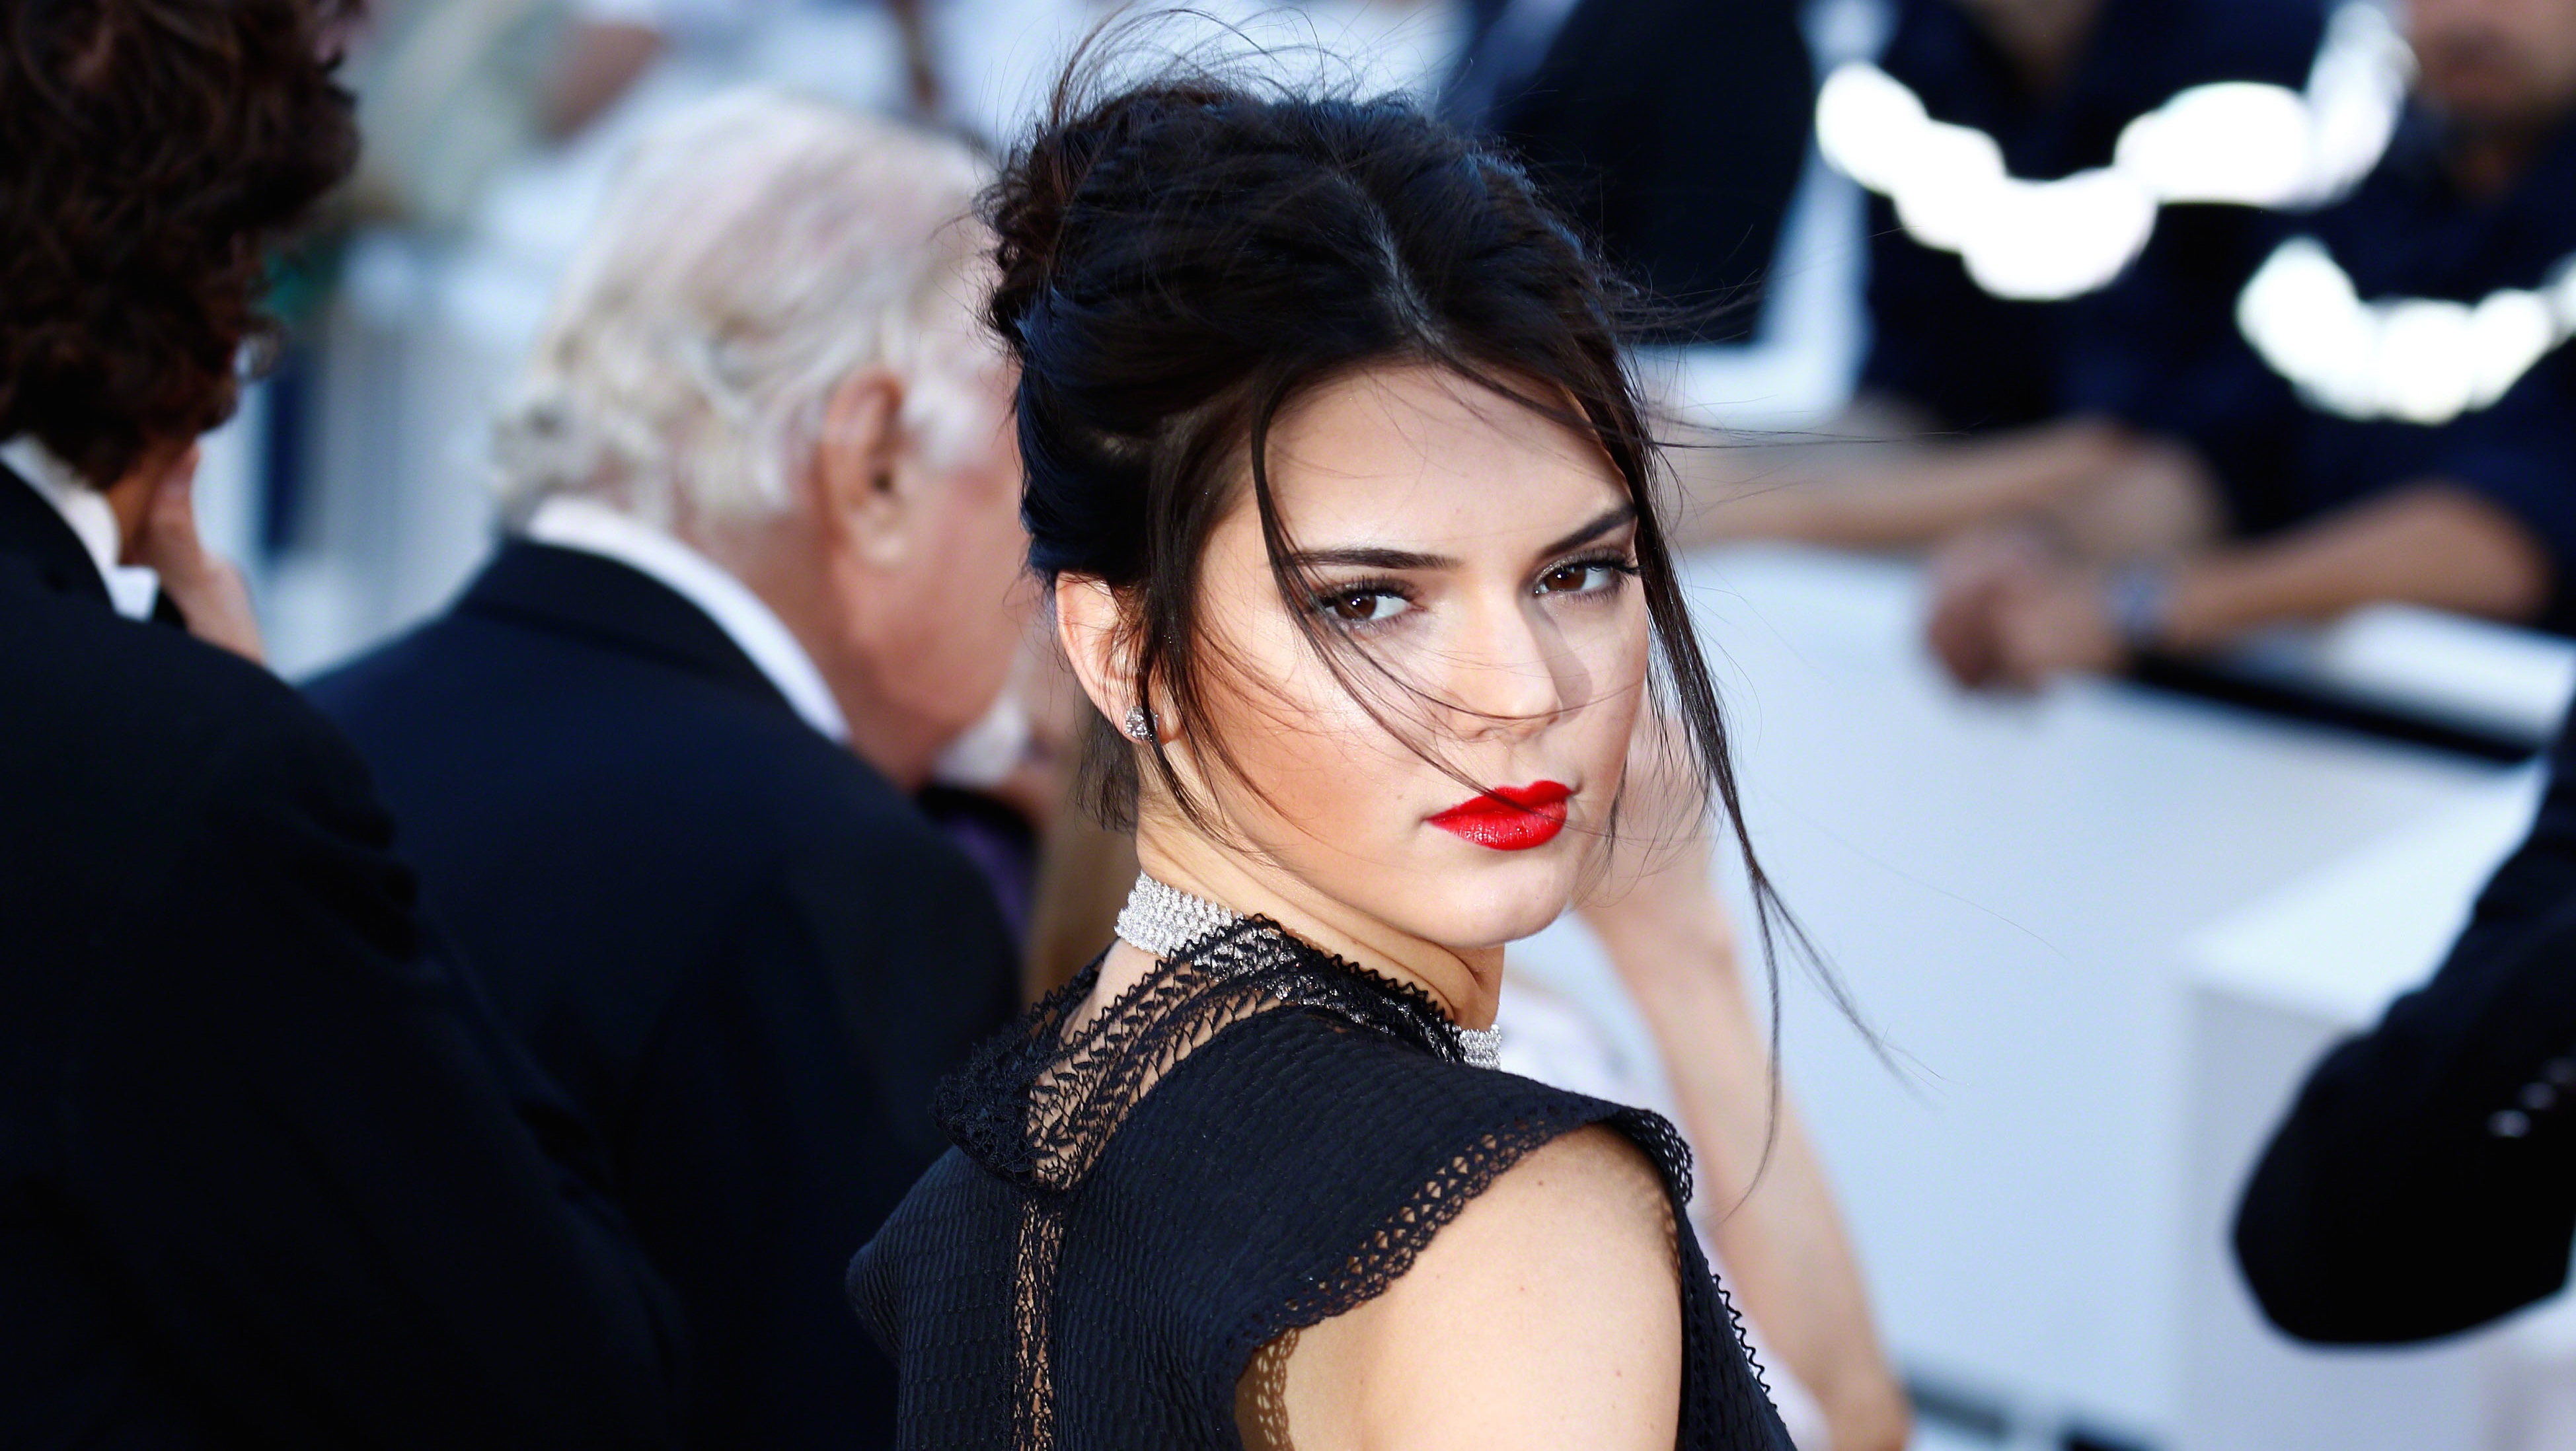 ***MANDATORY BYLINE TO READ INFPhoto.com ONLY*** Chanel Iman arriving at the premiere of 'Youth' during the 68th Annual Cannes Film festival in Cannes, France Pictured: Kendall Jenner Ref: SPL1032707  200515   Picture by: ACE/INFphoto.com 